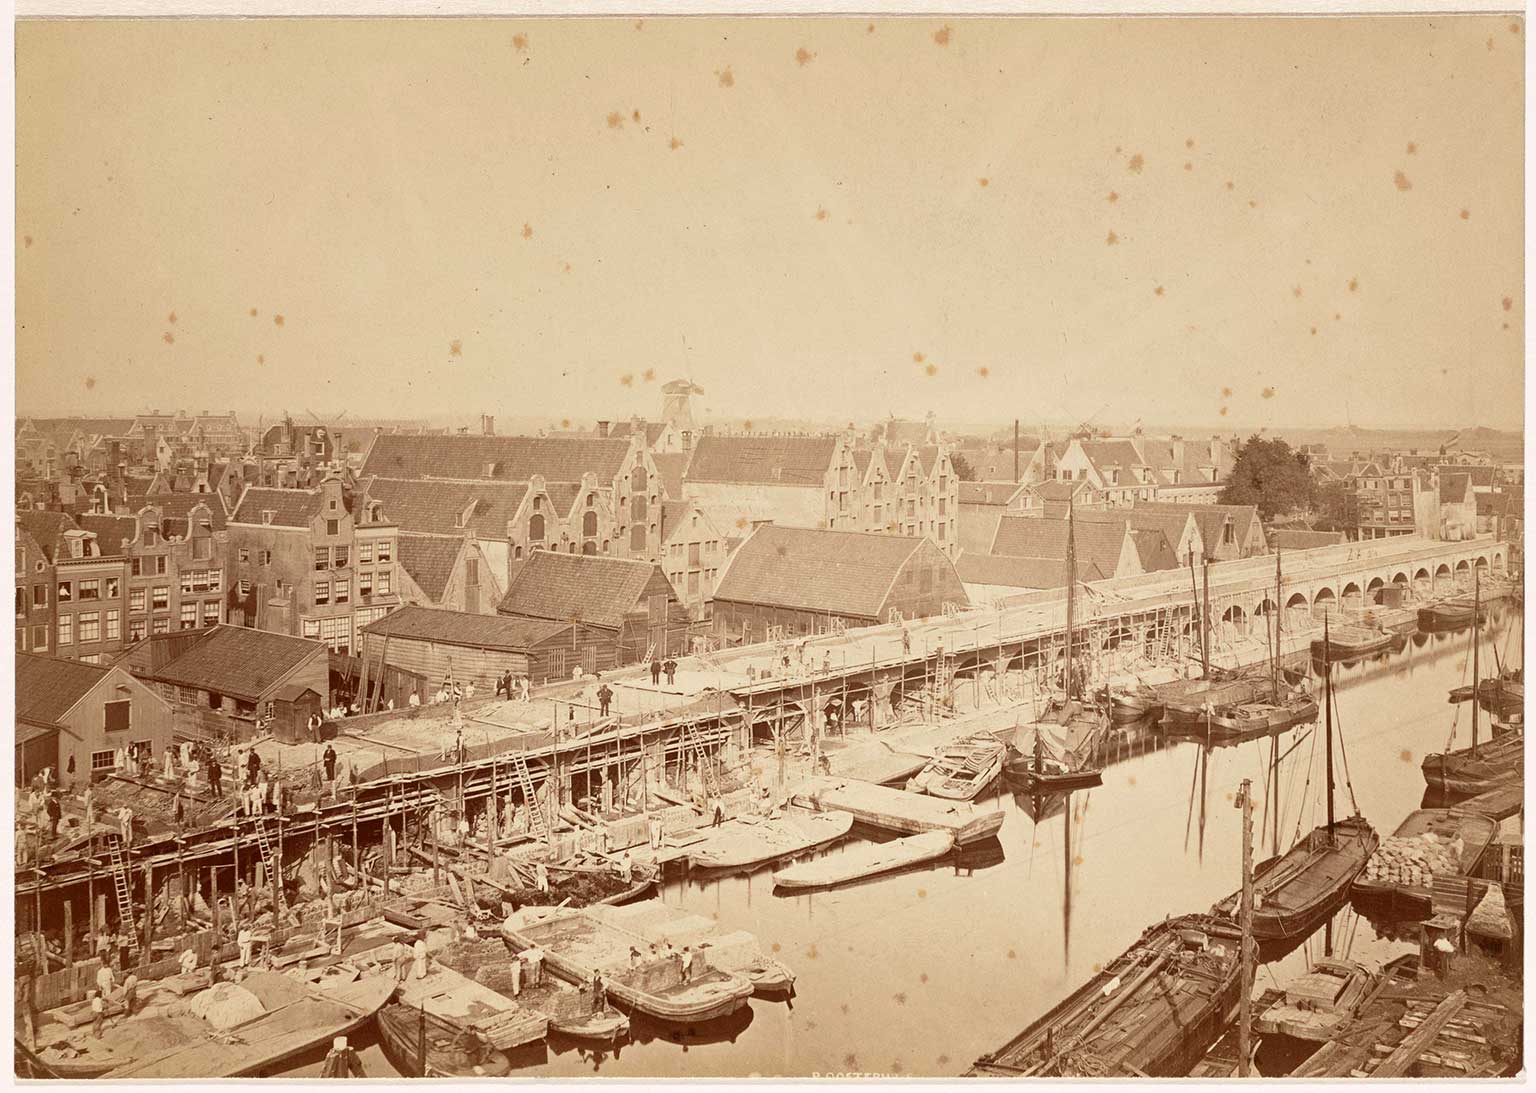 Construction of the railway along Eilandsgracht, Amsterdam, in 1872